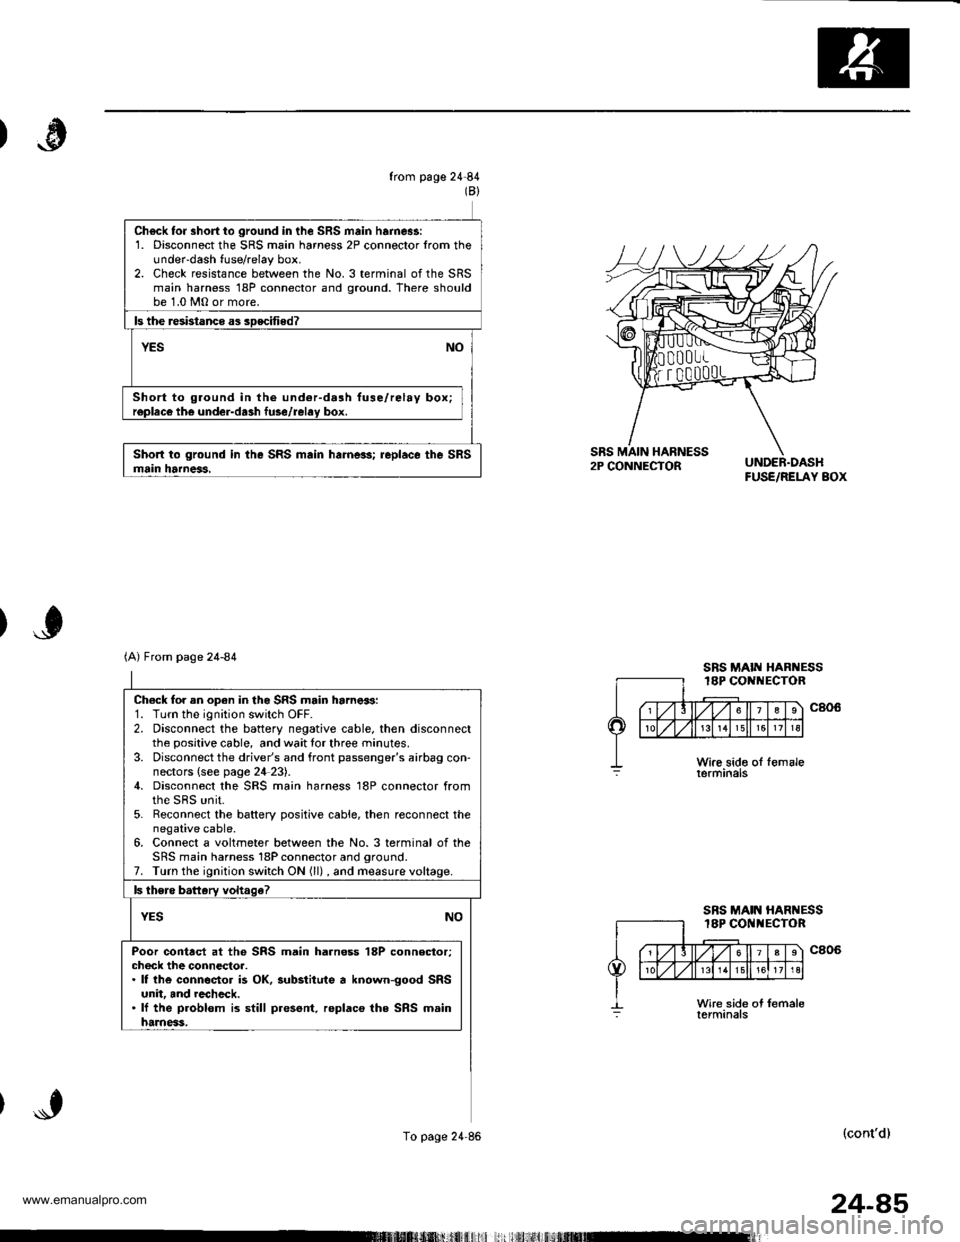 HONDA CR-V 2000 RD1-RD3 / 1.G Workshop Manual 
from page 2484(B)
Ch6ck fo. short io ground in the SRS main harnes!:1. Disconnect the SRS main harness 2P connector lrom theunder-dash fuse/relay box.2. Check resistance between the No. 3 terminal o